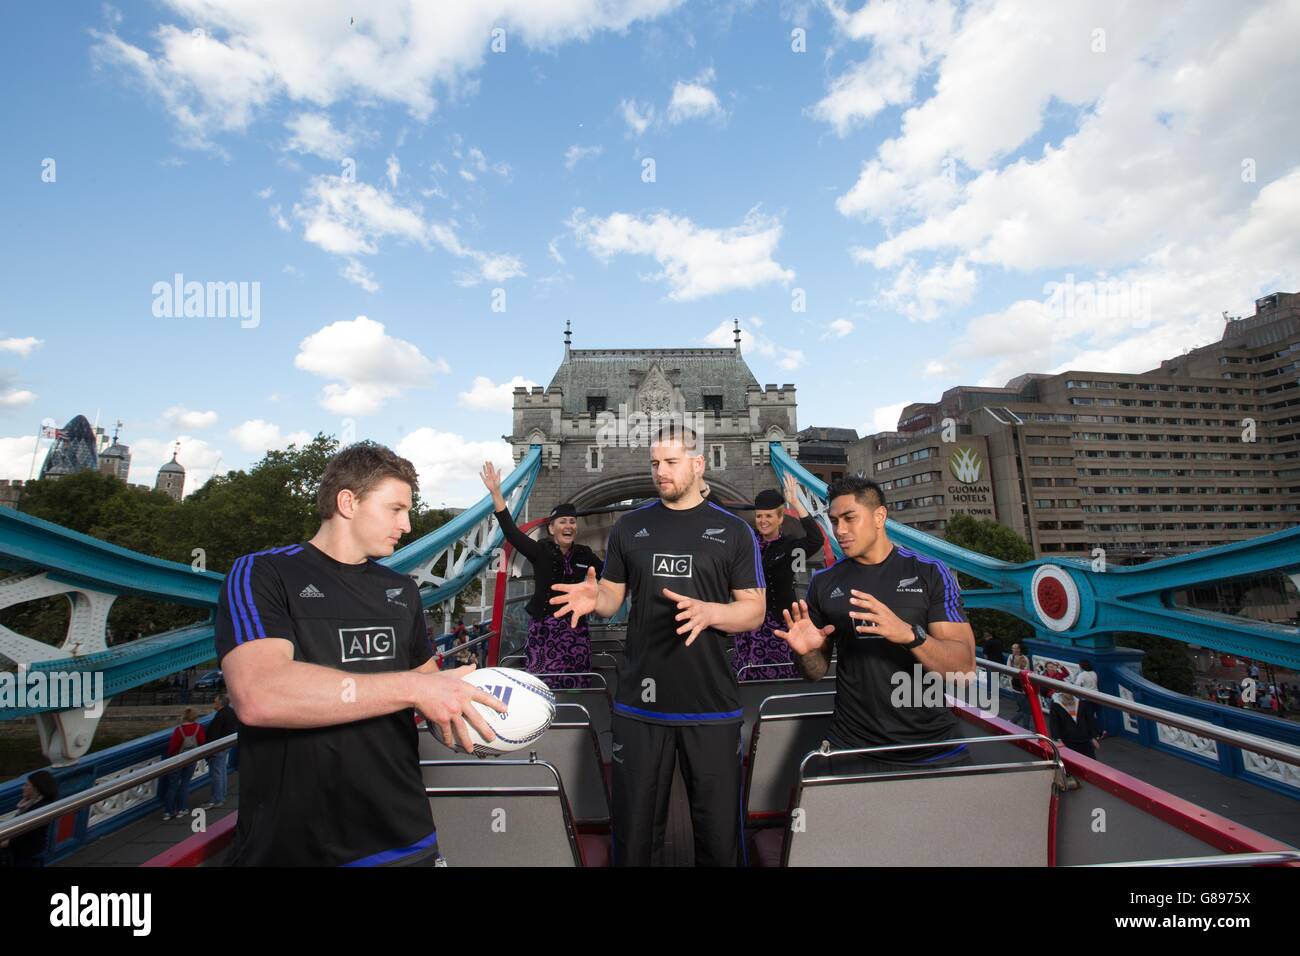 EDITORIAL USE ONLY (left to right) Beauden Barrett, Dane Coles and Malakai Fekitoa from New Zealand's national rugby squad, the All Blacks, touring London with team sponsor, Air New Zealand to launch the airline's #SQUAD competition. Stock Photo